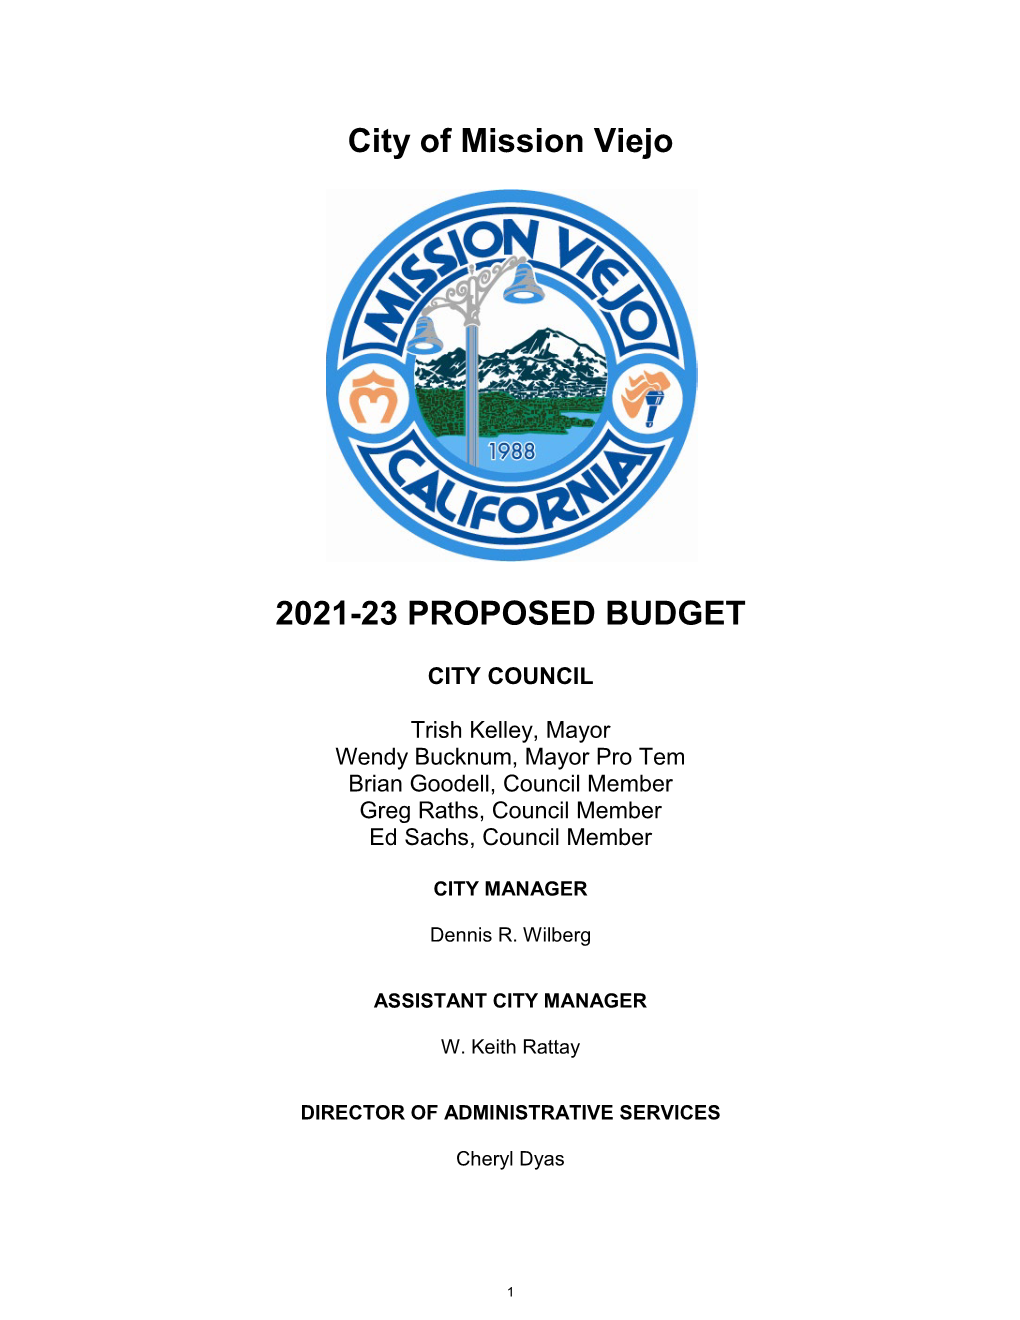 CITY of MISSION VIEJO 2021-23 Proposed Budget Table of Contents